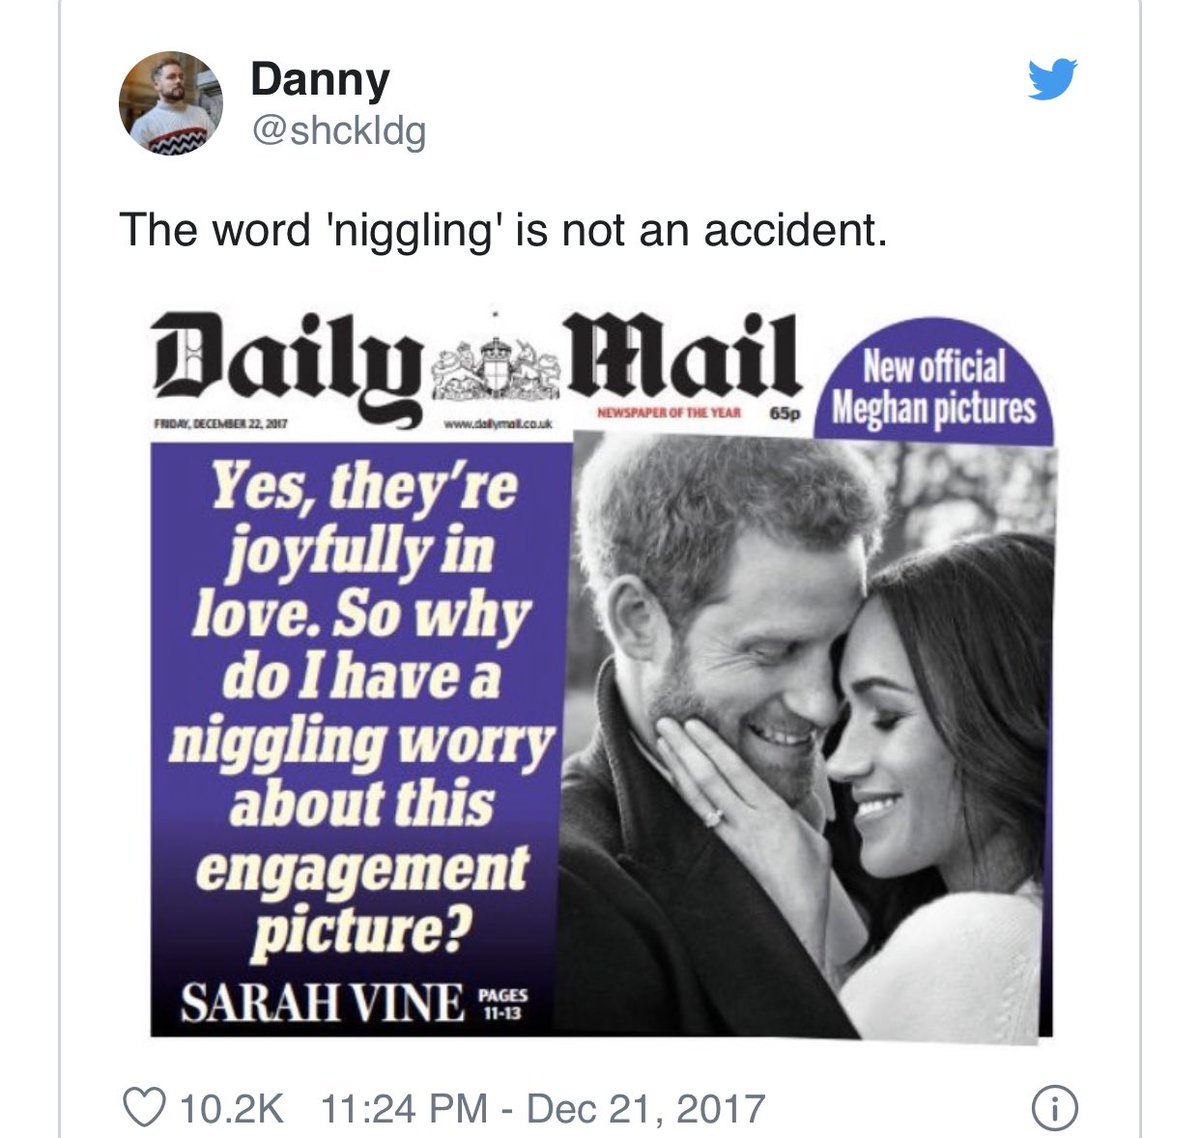 The relationship continued and then we got the announcement that they were engaged!! YAY!!! not for the British Press though because almost immediately people called Meghan trouble, not the right fit, she doesn’t look Royal, that her seed what going to taint the Royal Fold ect